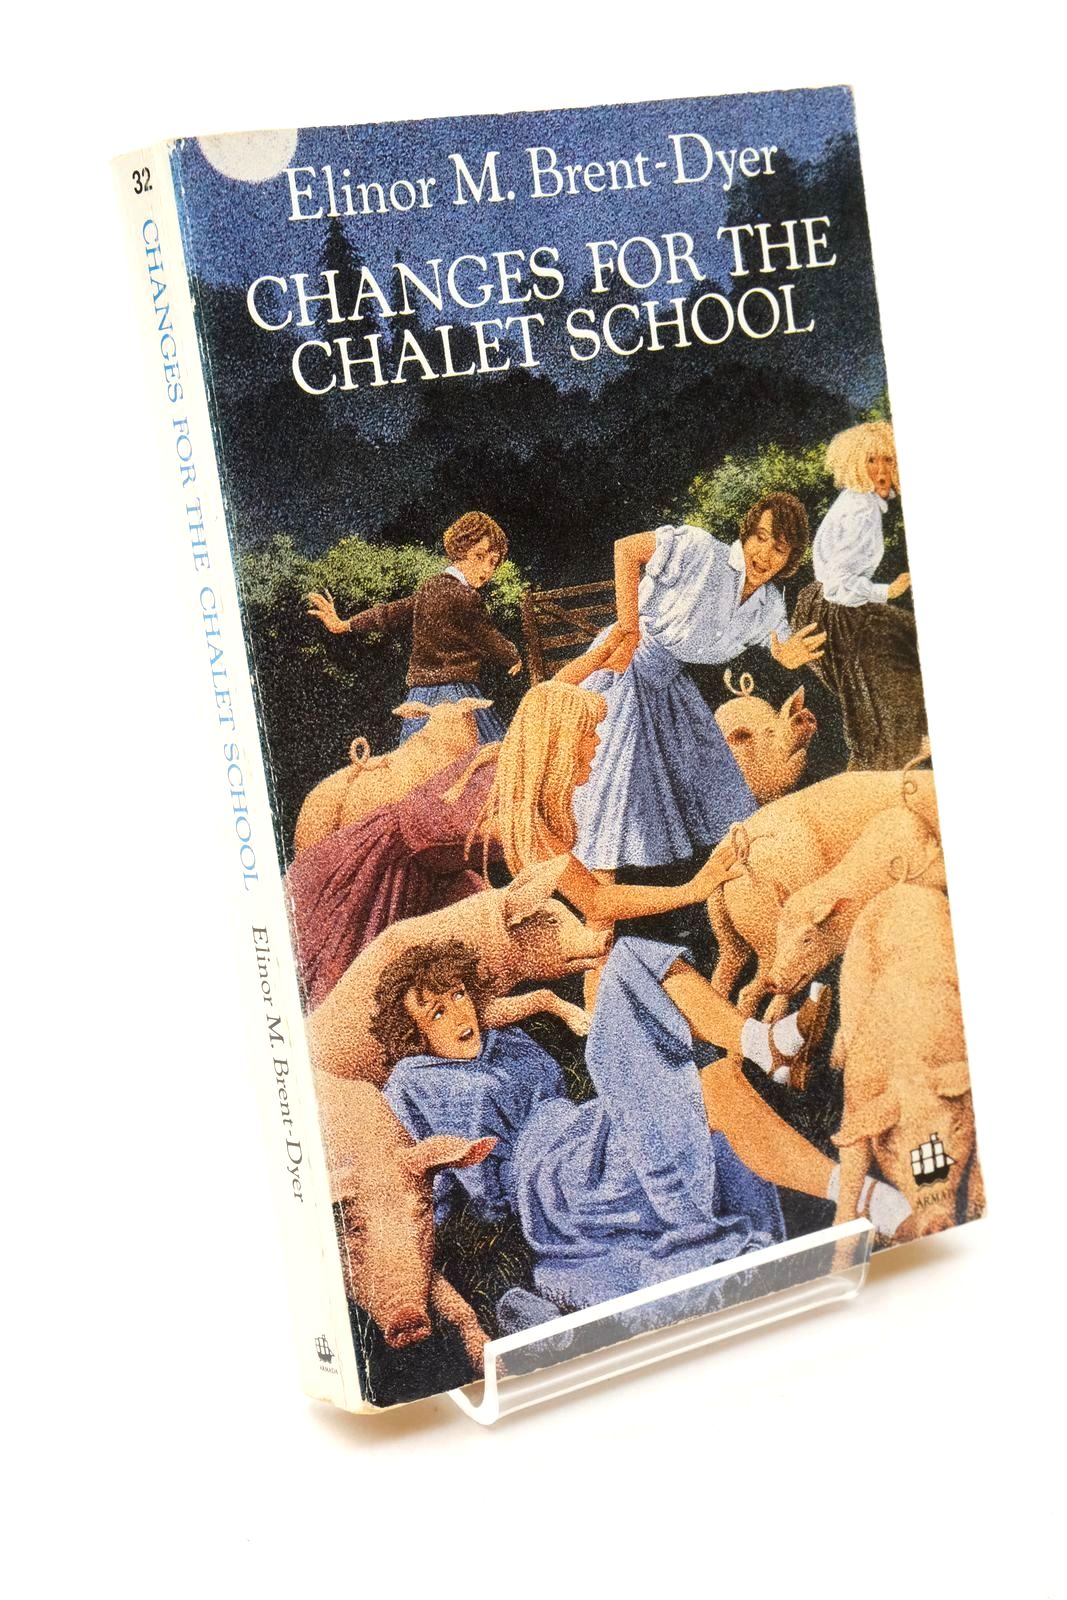 Photo of CHANGES FOR THE CHALET SCHOOL written by Brent-Dyer, Elinor M. published by Armada (STOCK CODE: 1322573)  for sale by Stella & Rose's Books